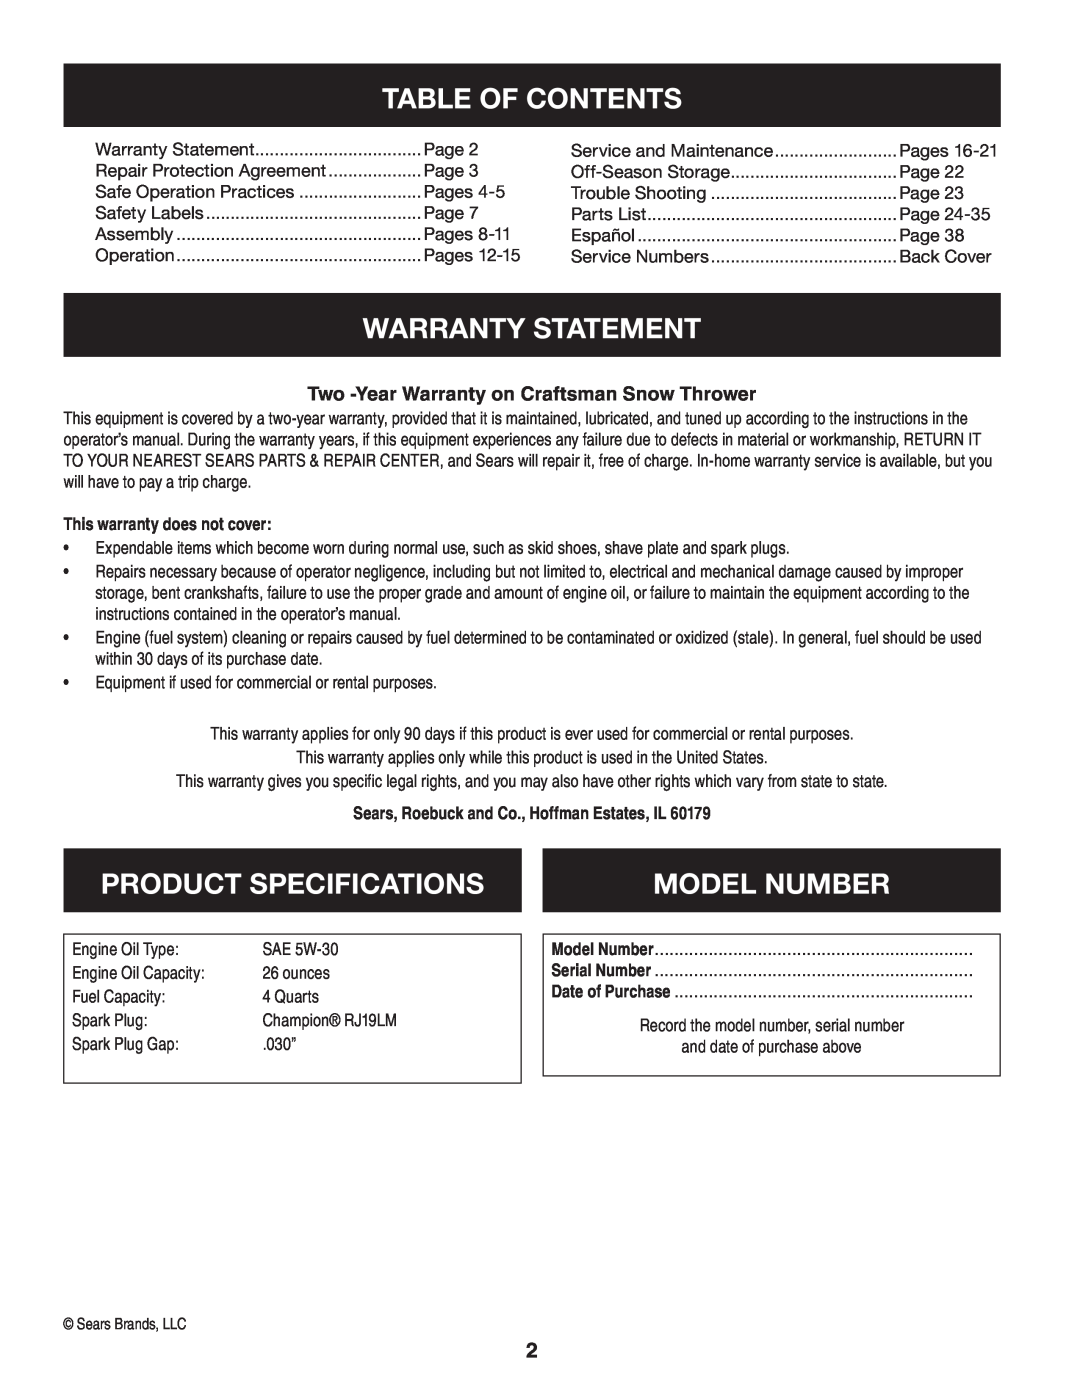 Sears 247.8879 Table Of Contents, Warranty Statement, Product Specifications, Model Number, This warranty does not cover 